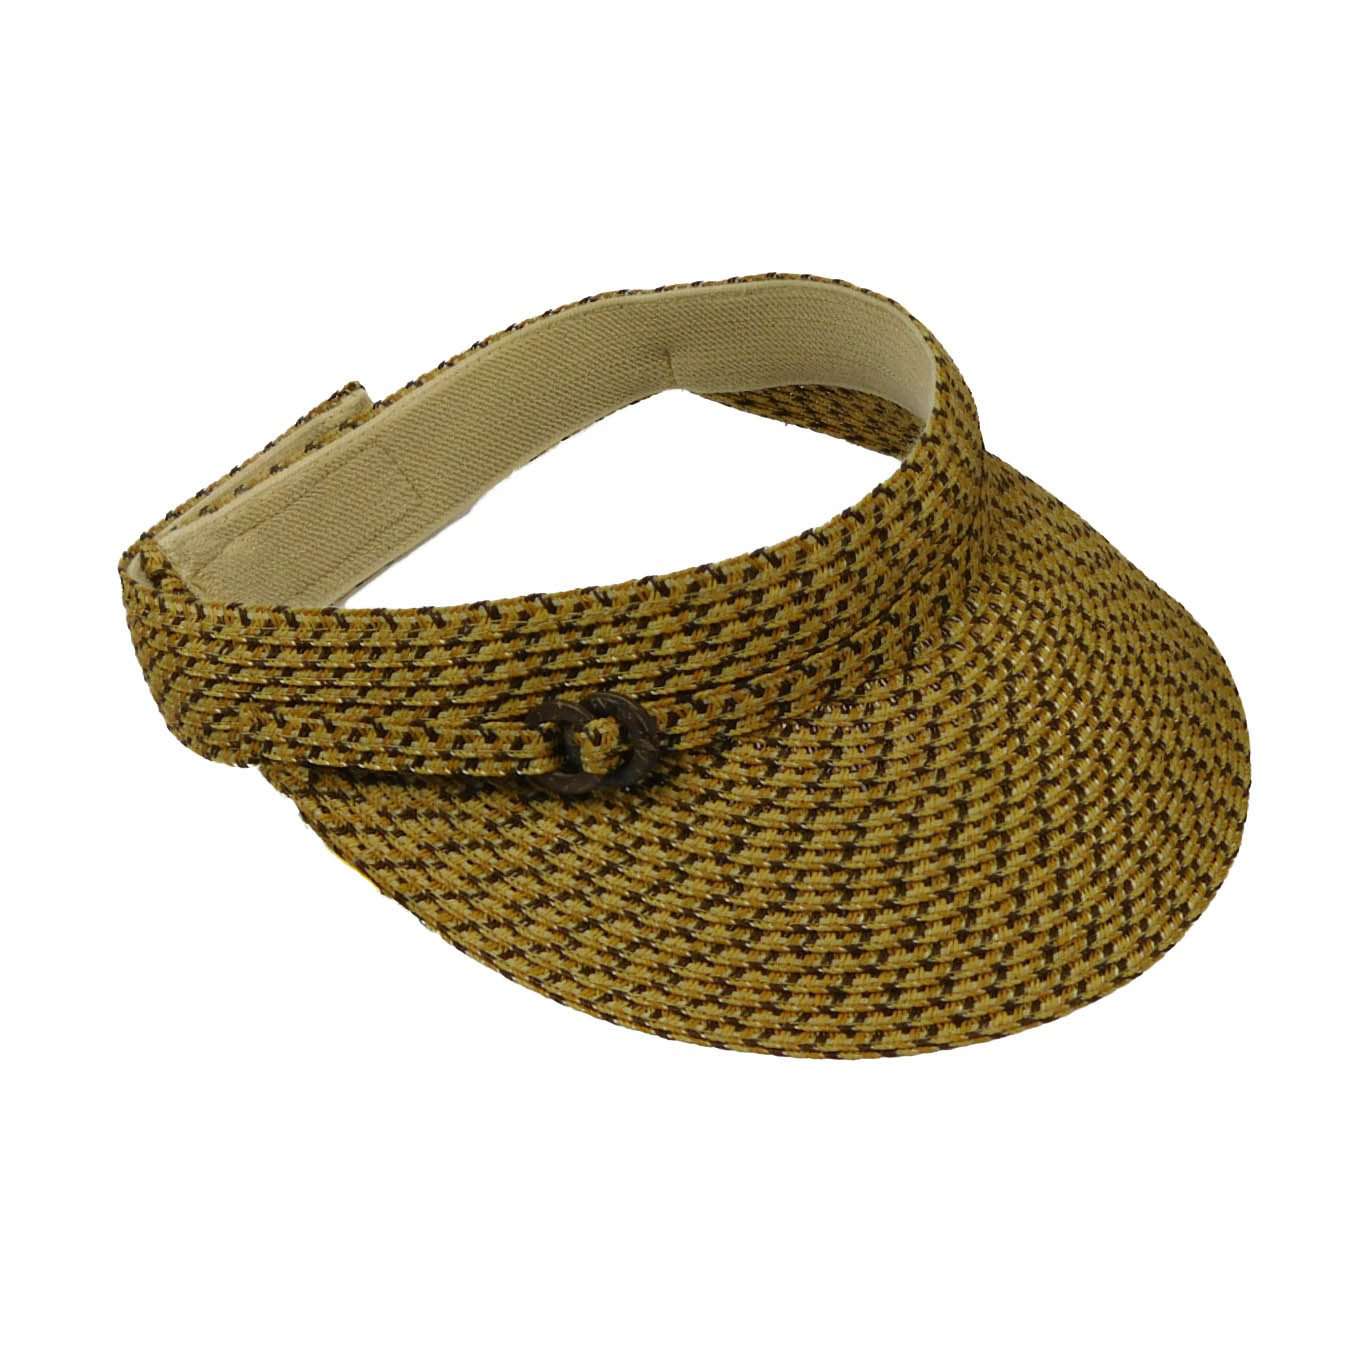 Straw Sun Visor with Belt Buckle Accent - Jeanne Simmons Accessories Visor Cap Jeanne Simmons WSPP530BN Taupe  